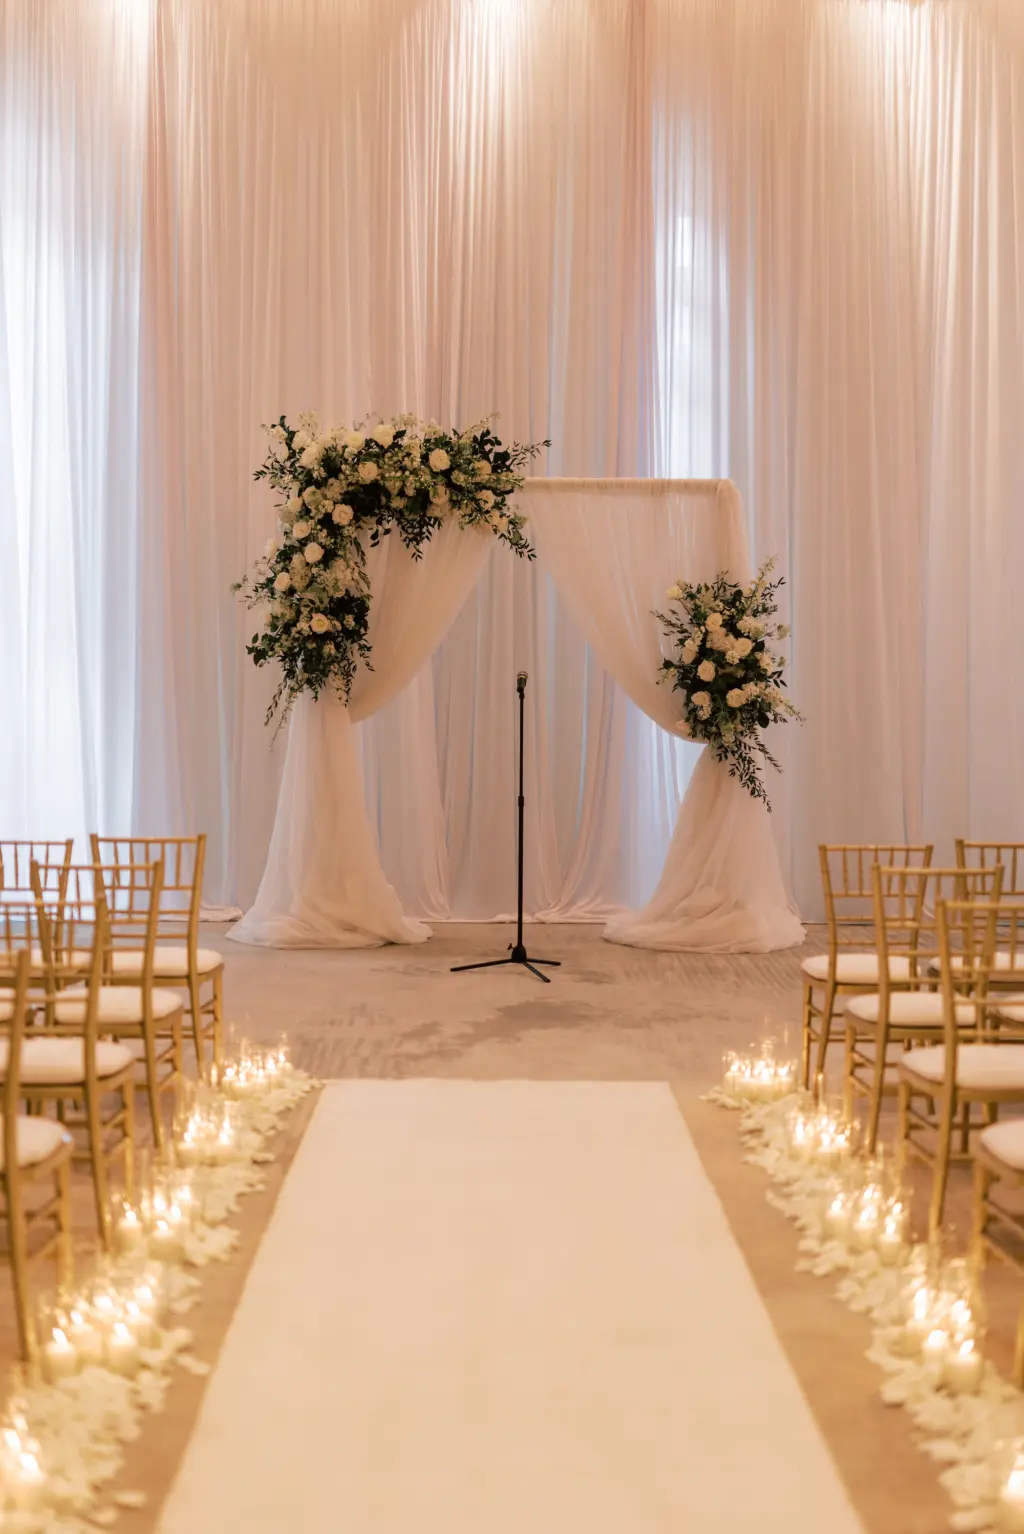 Romantic White Pipe and Drapery for Wedding Ceremony | White Flower Petals and Candles Lining Aisle Decor Ideas | Tampa Bay Rental Company Gabro Event Services